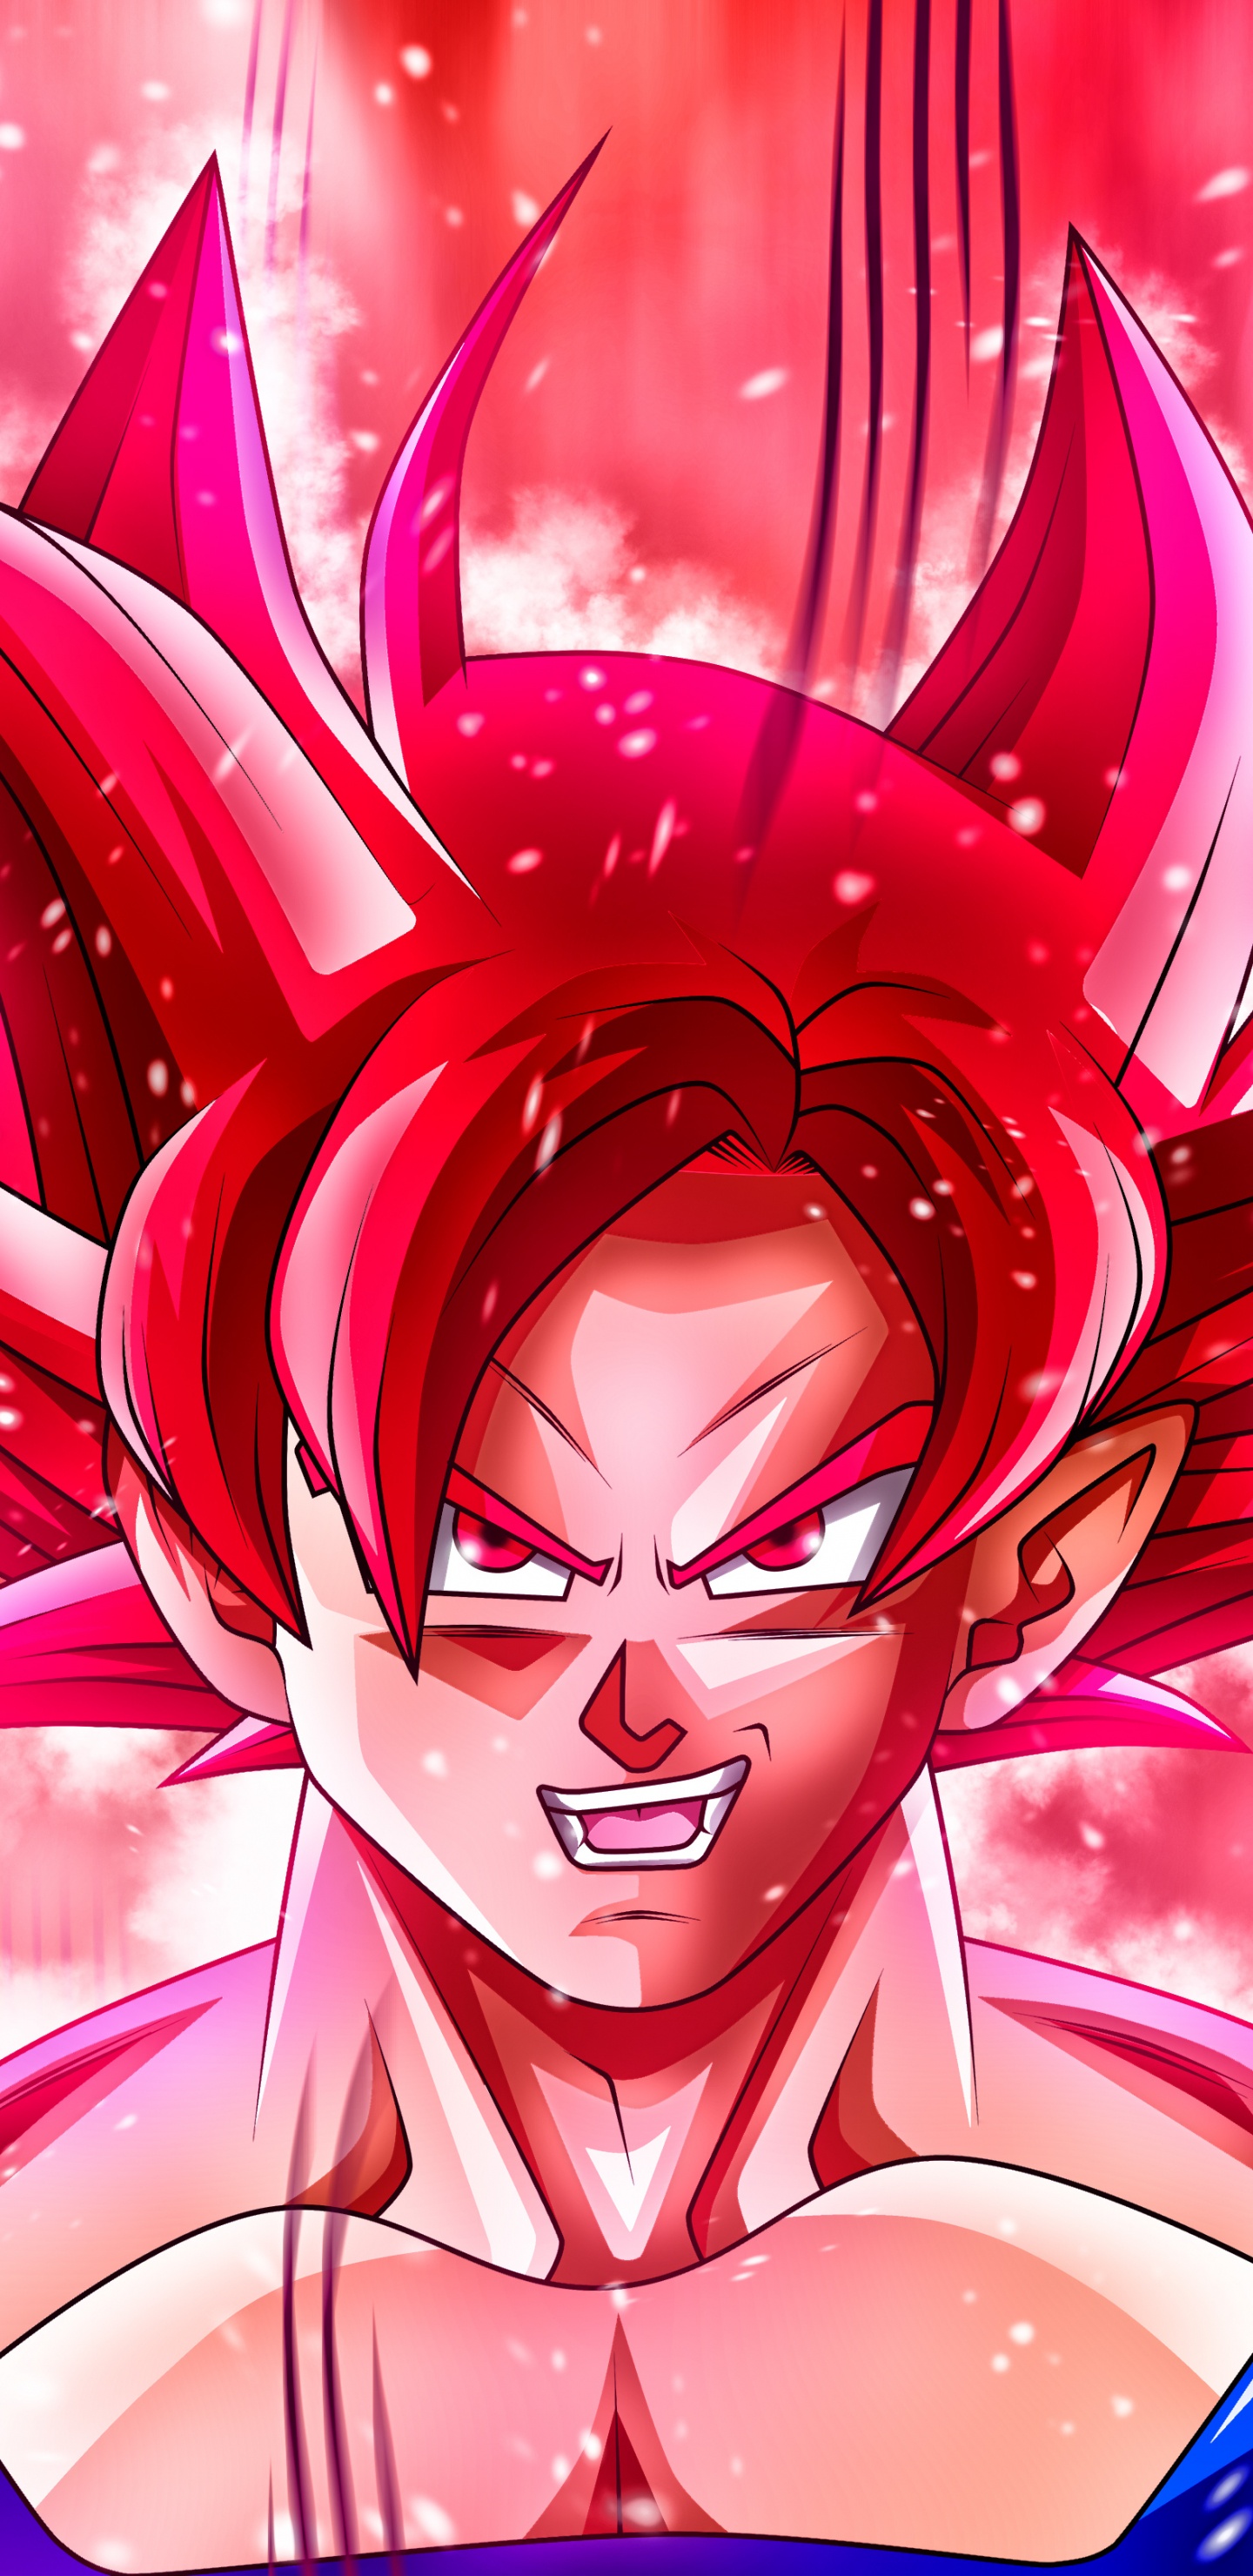 1440x2960 Goku Wallpapers for Samsung Galaxy S8/S8+/S9/S9+/Note 8/Note 9 QHD